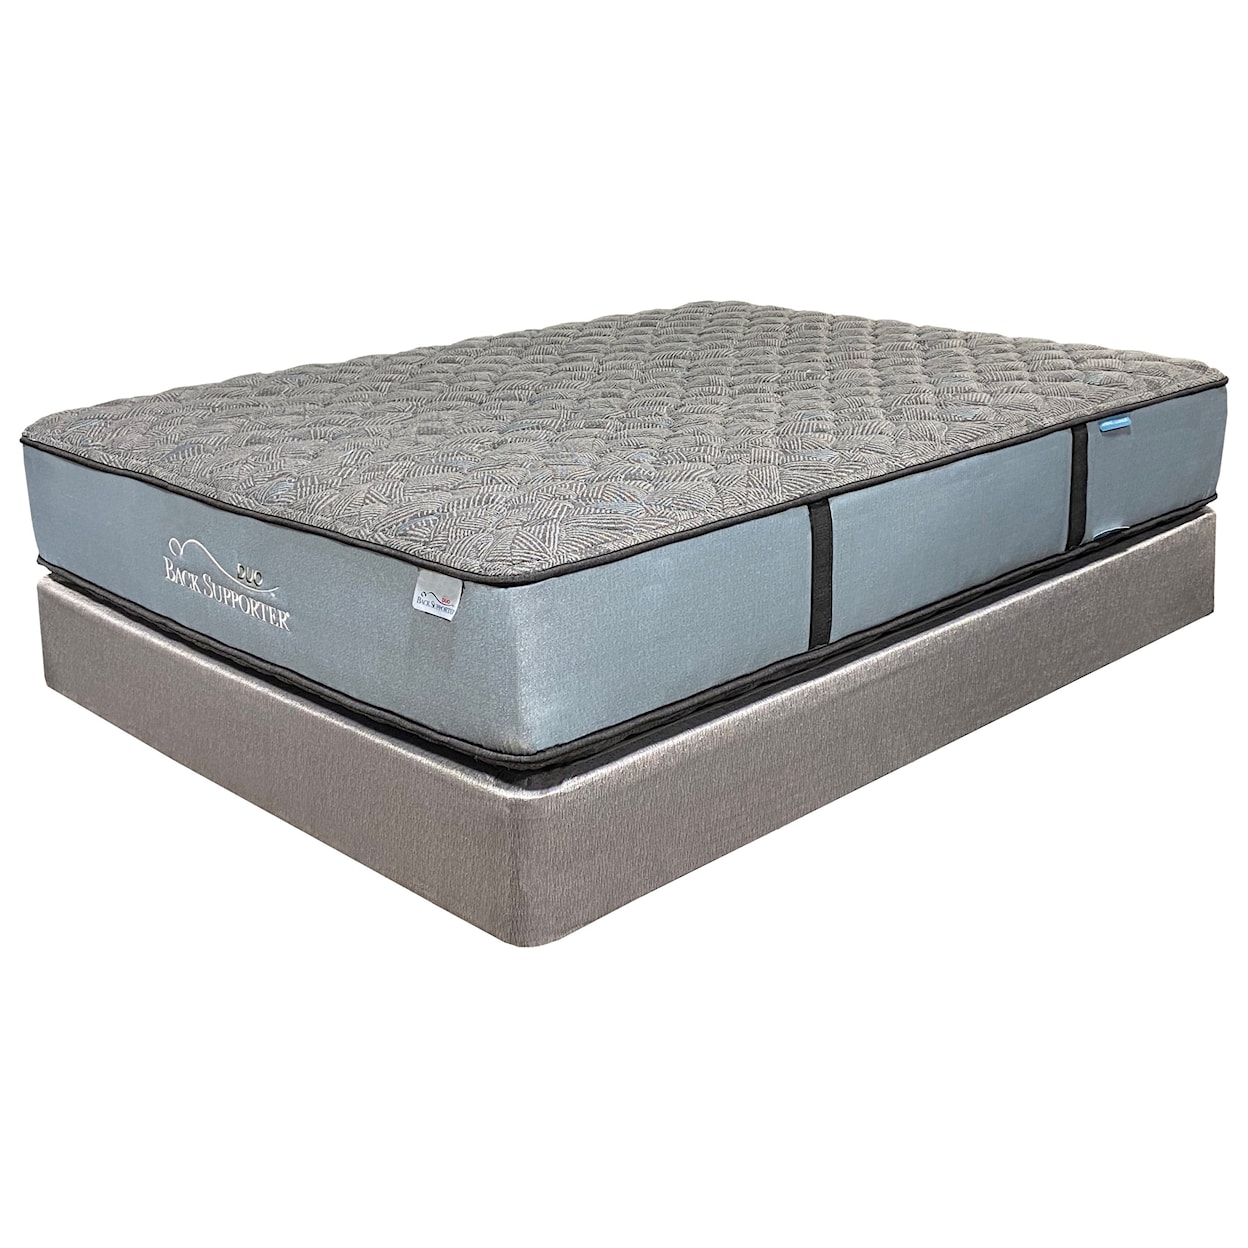 Spring Air All-Seasons Duo Haven Firm Full Firm Mattress